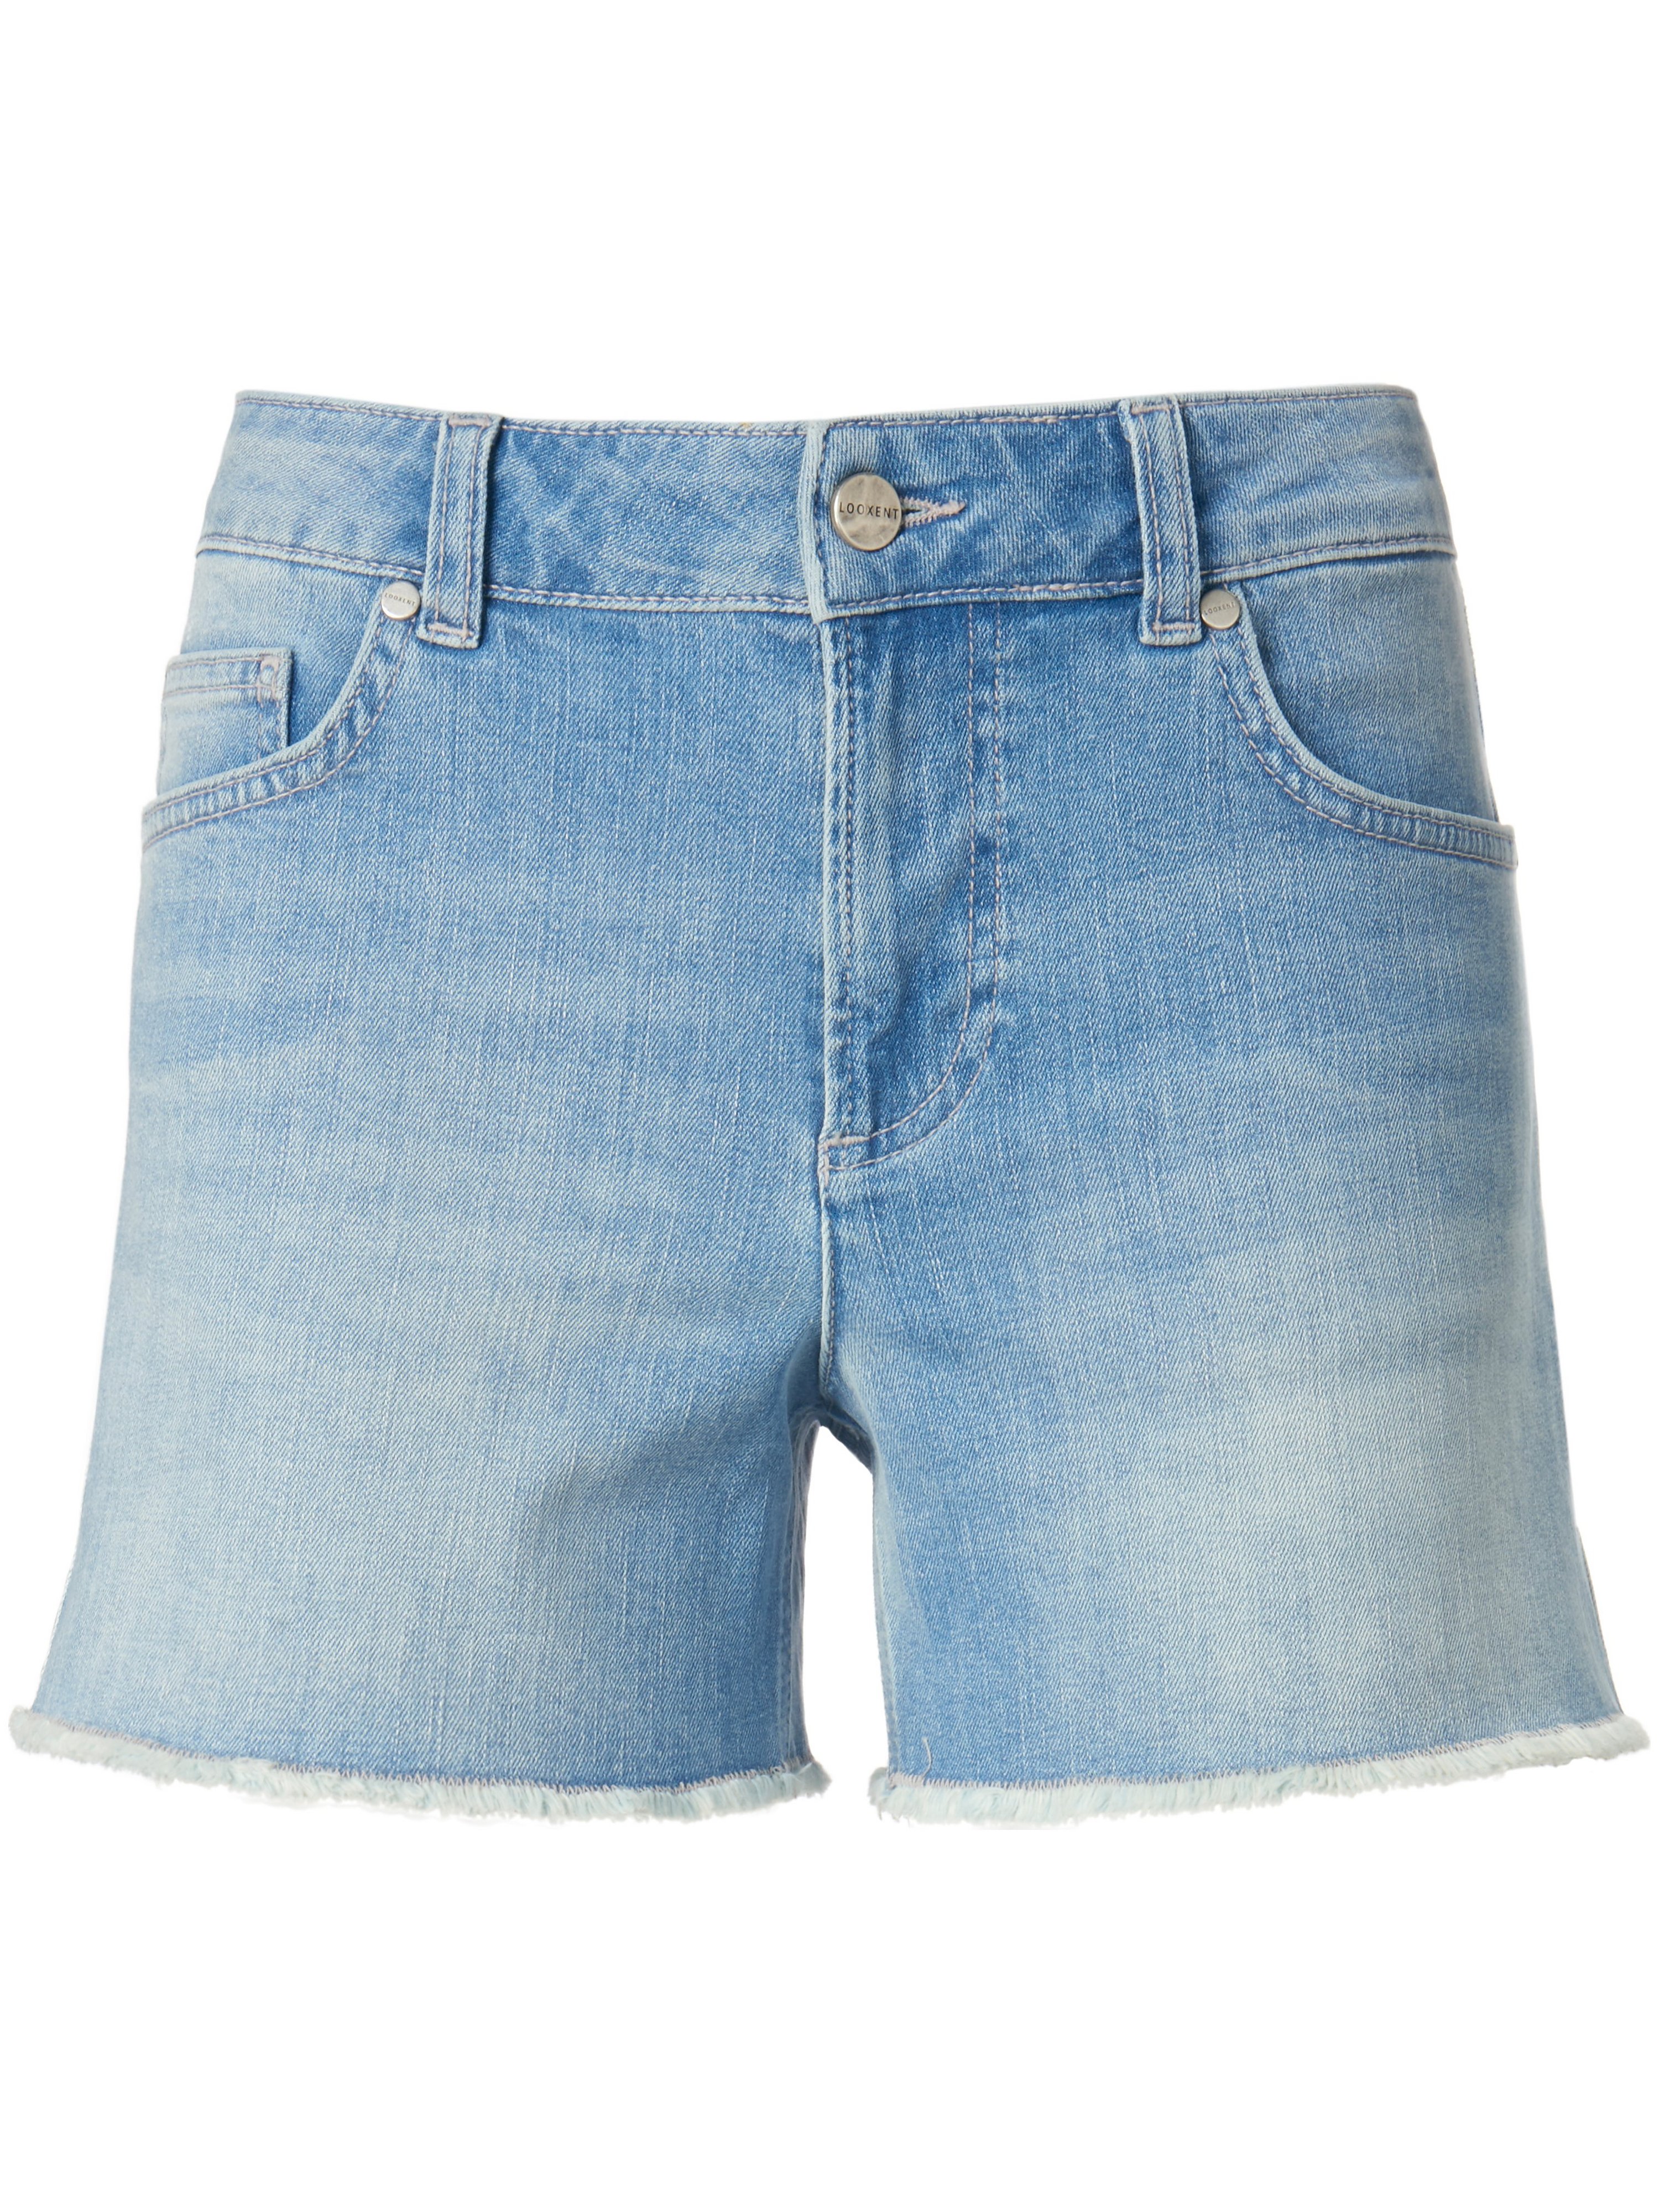 Le short jean coupe 5 poches  Looxent denim taille 44